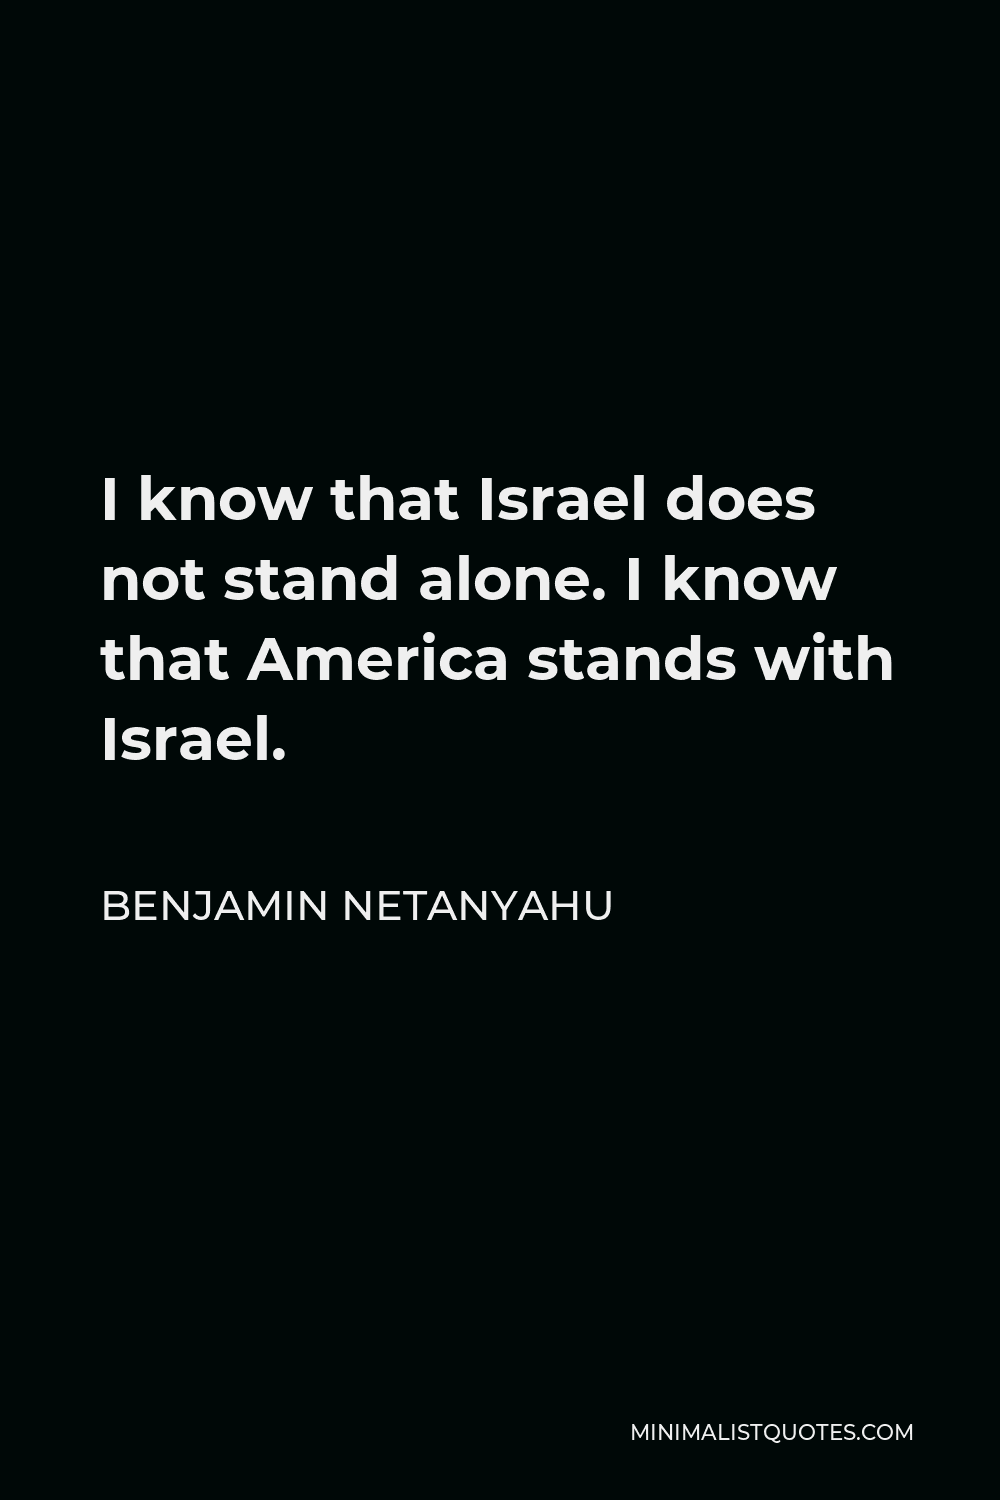 Benjamin Netanyahu Quote - I know that Israel does not stand alone. I know that America stands with Israel.